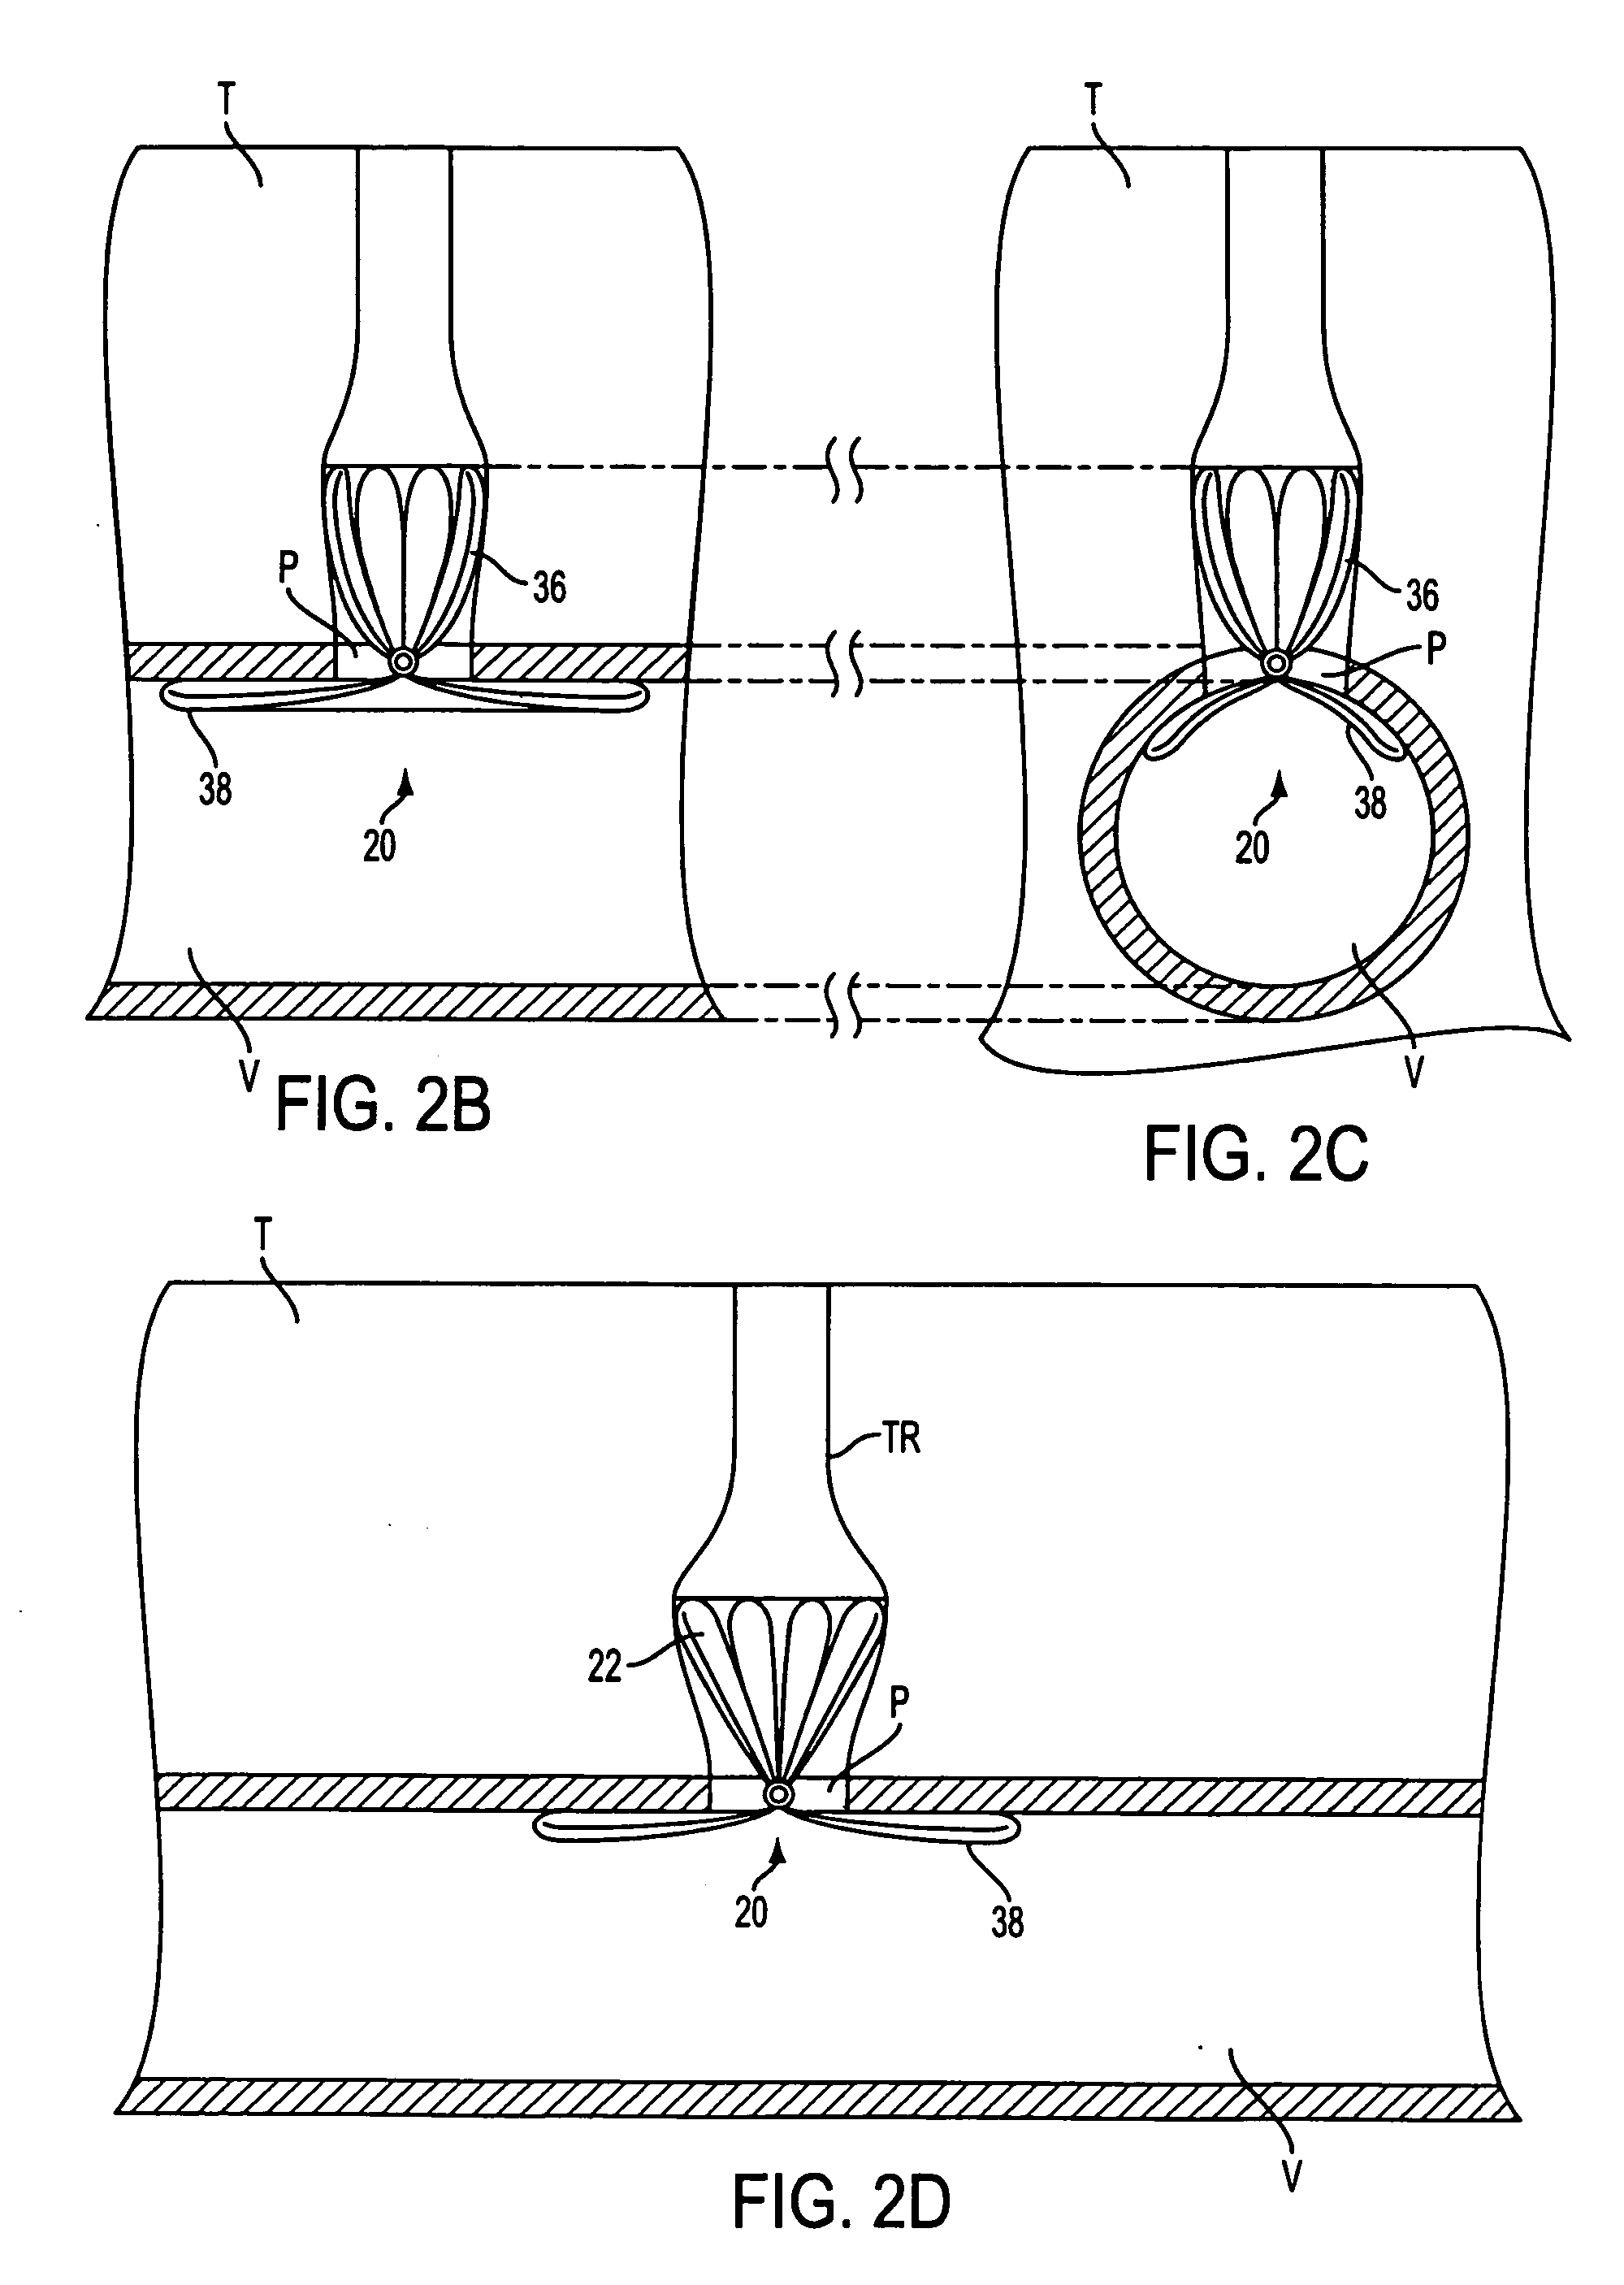 Apparatus for sealing surgical punctures